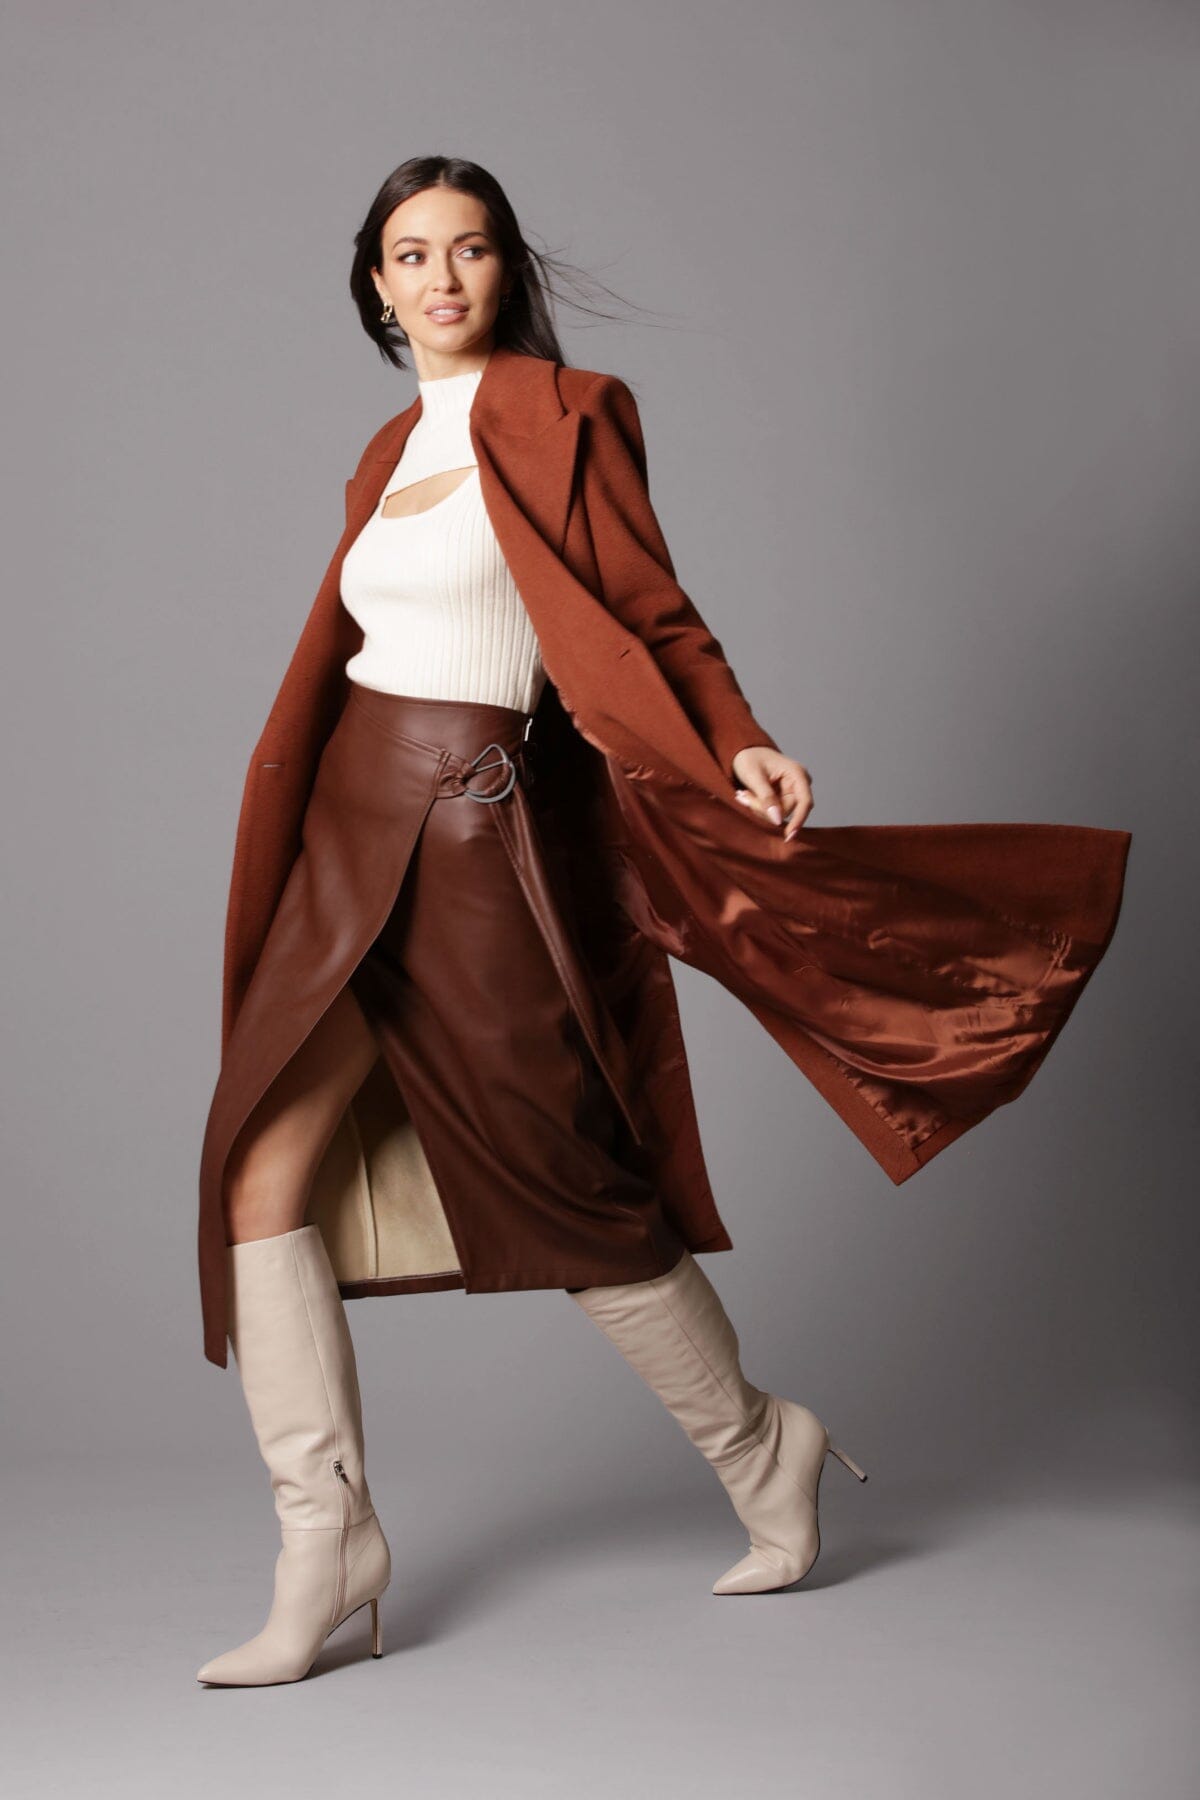 Designer fashion cinnamon brown tailored double-breasted long coat by Avec Les Filles Coats & Jackets